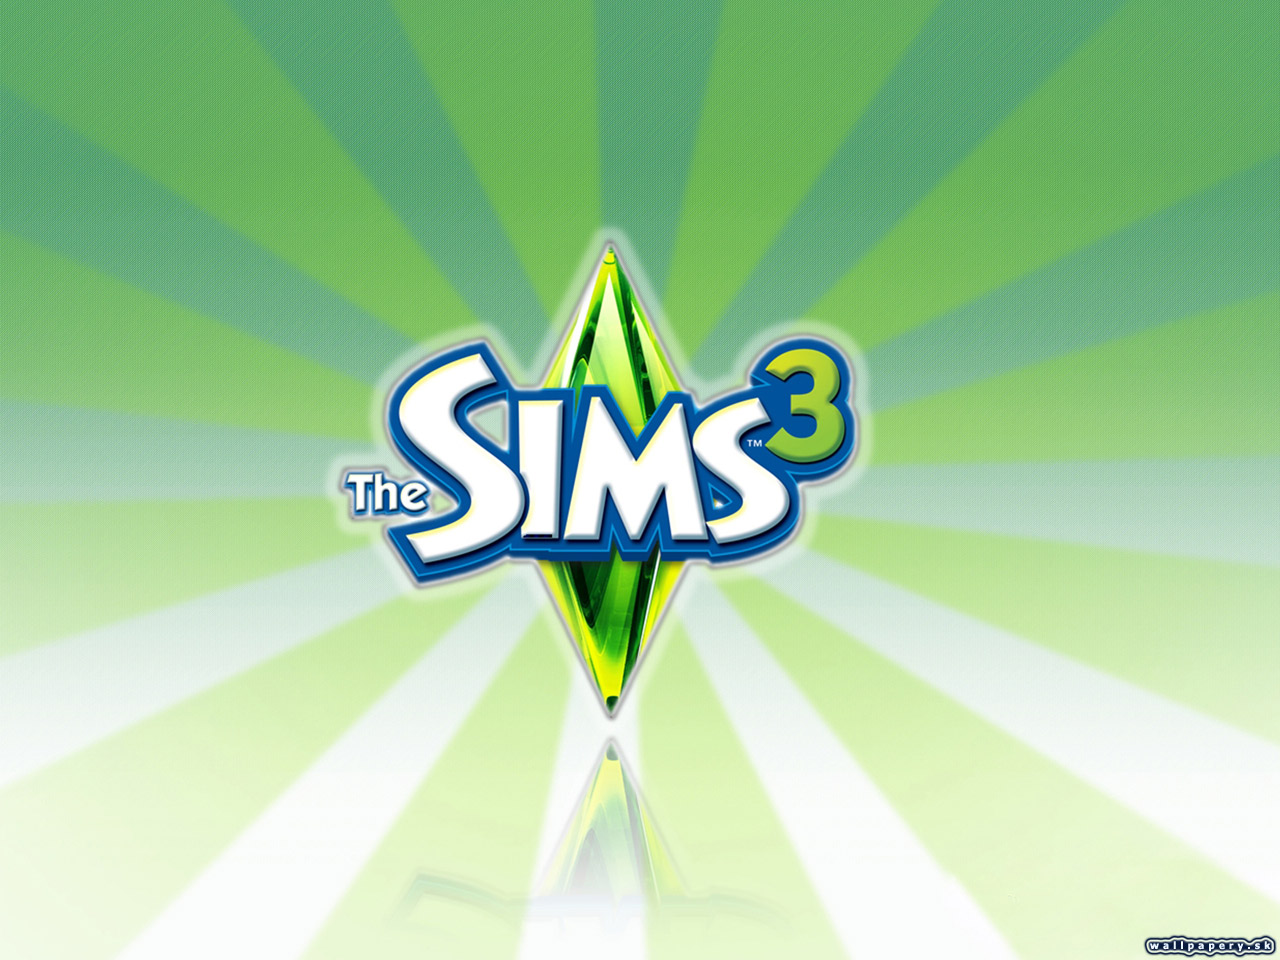 The Sims 3 - wallpaper 8